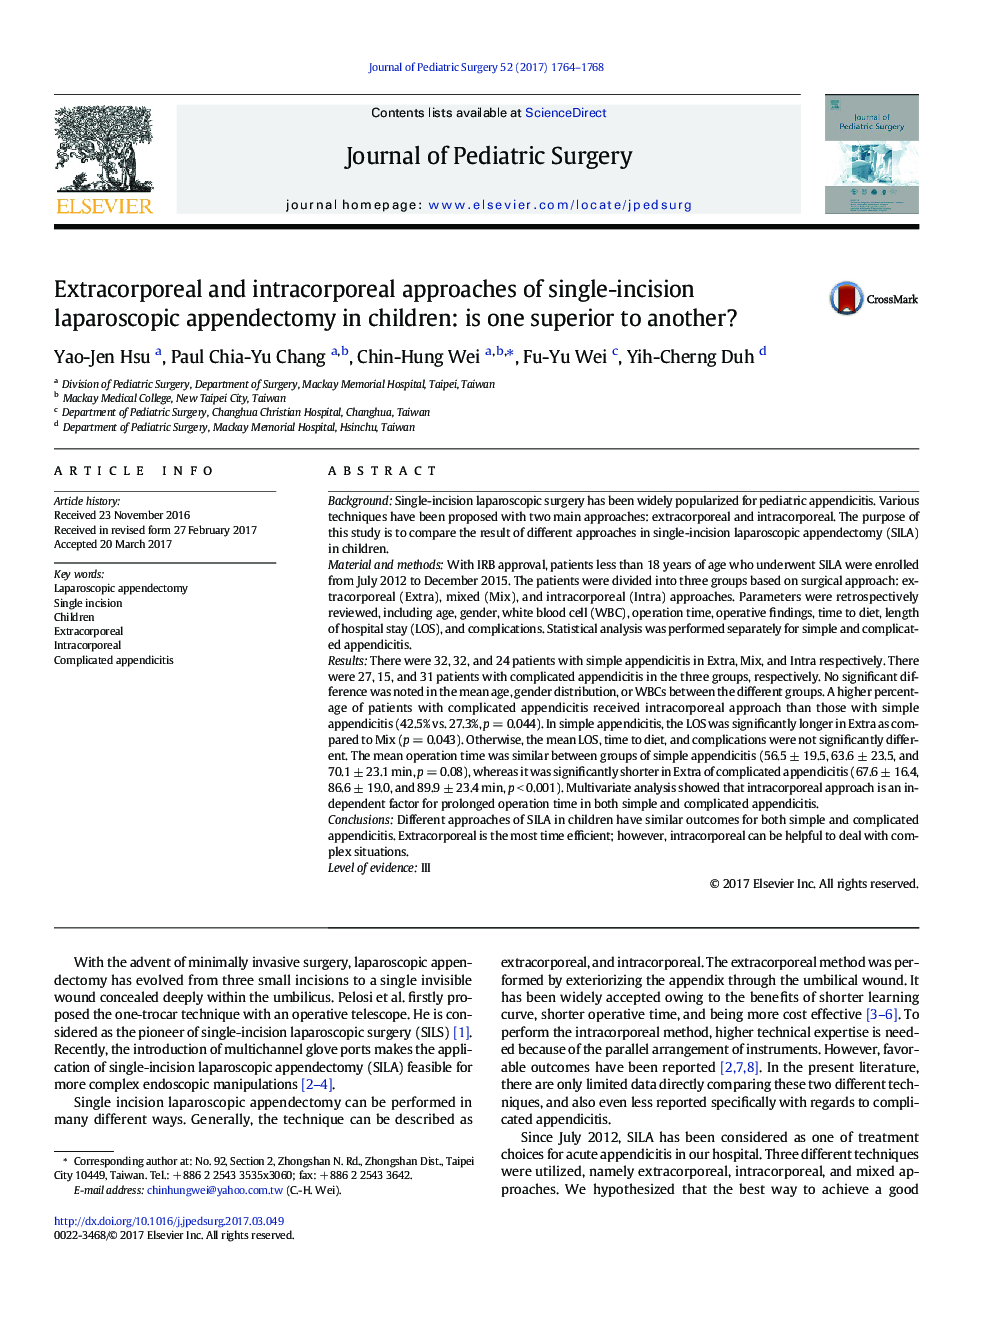 Extracorporeal and intracorporeal approaches of single-incision laparoscopic appendectomy in children: is one superior to another?